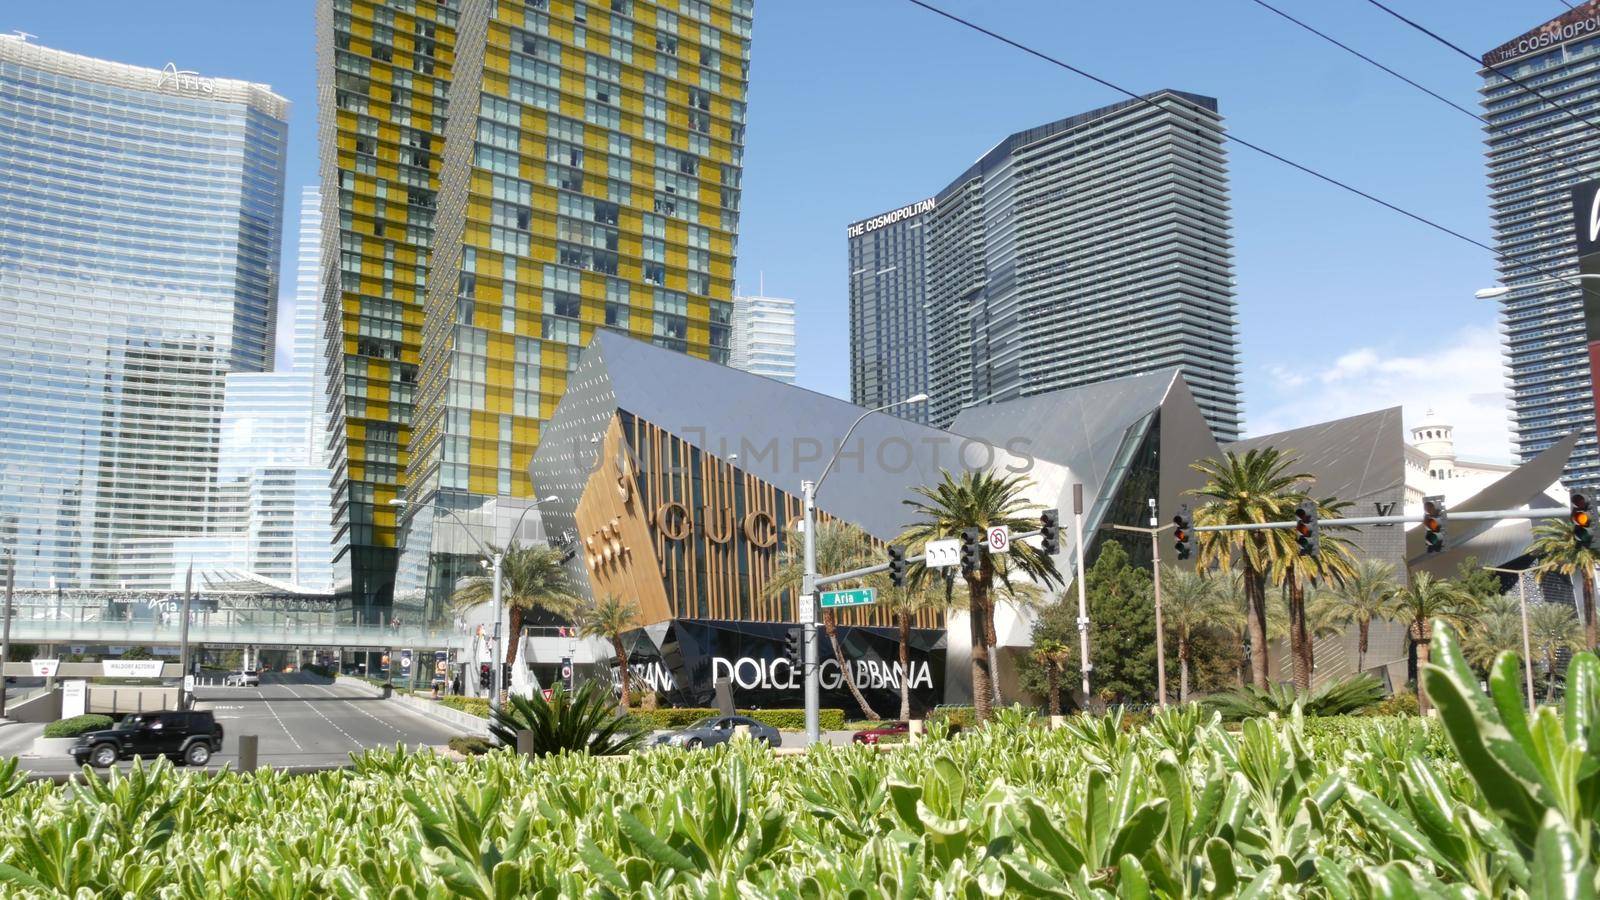 LAS VEGAS, NEVADA USA - 7 MAR 2020: Futuristic CityCenter casinos in sin city. Modern luxury unincorporated urban skyline. Contemporary metropolis highrise skyscrapers and Crystals rich shopping mall.